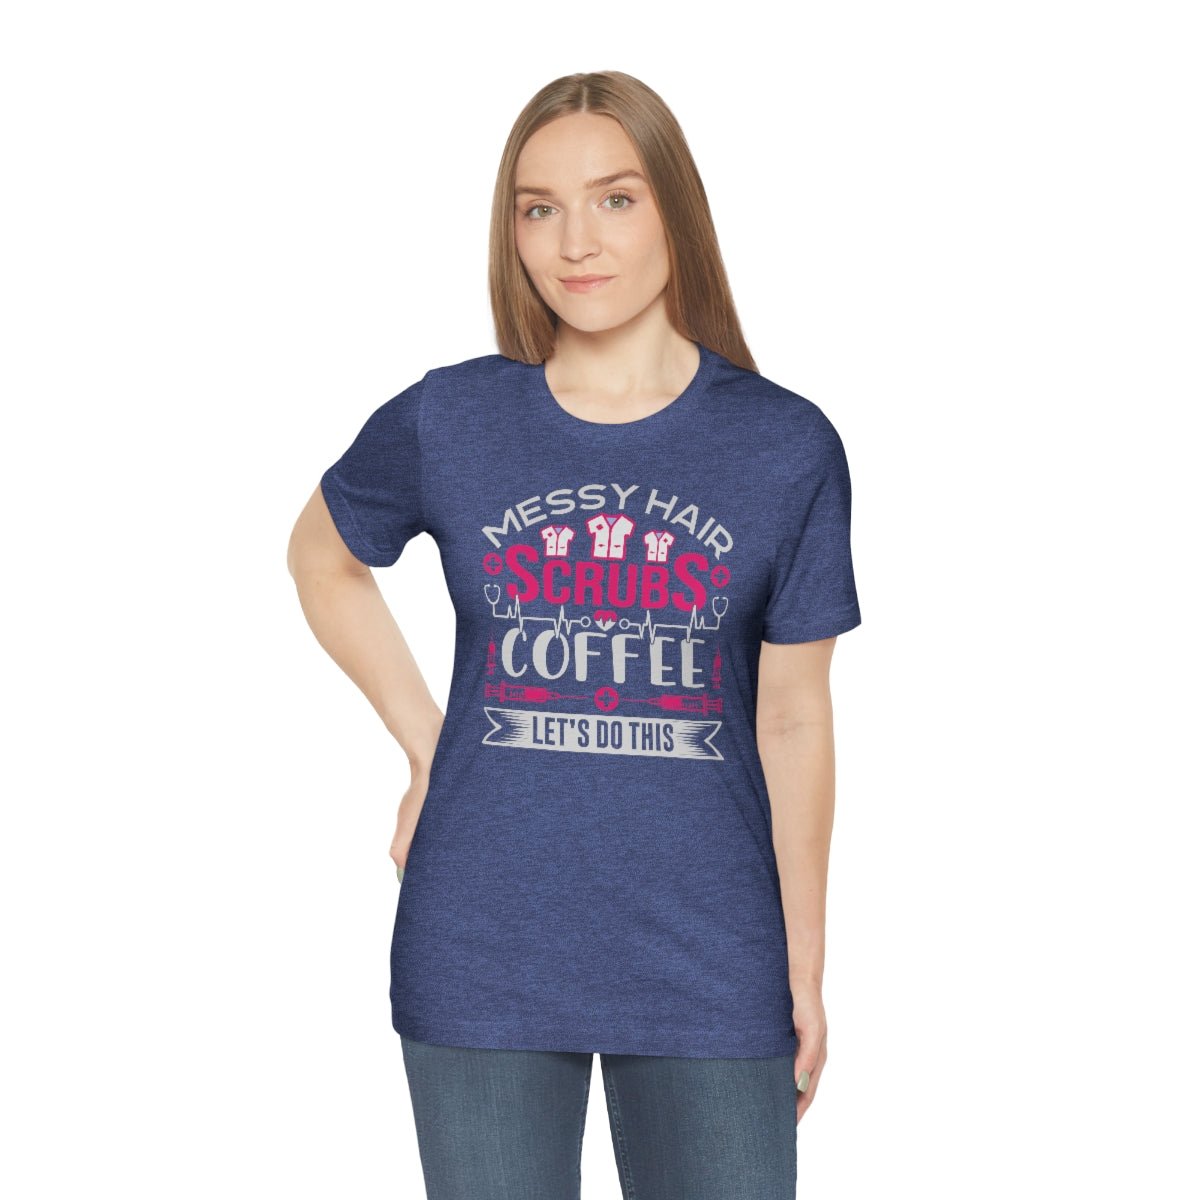 Messy hair, Scrubs and Coffee Women's Short Sleeve Tee - Salty Medic Clothing Co.